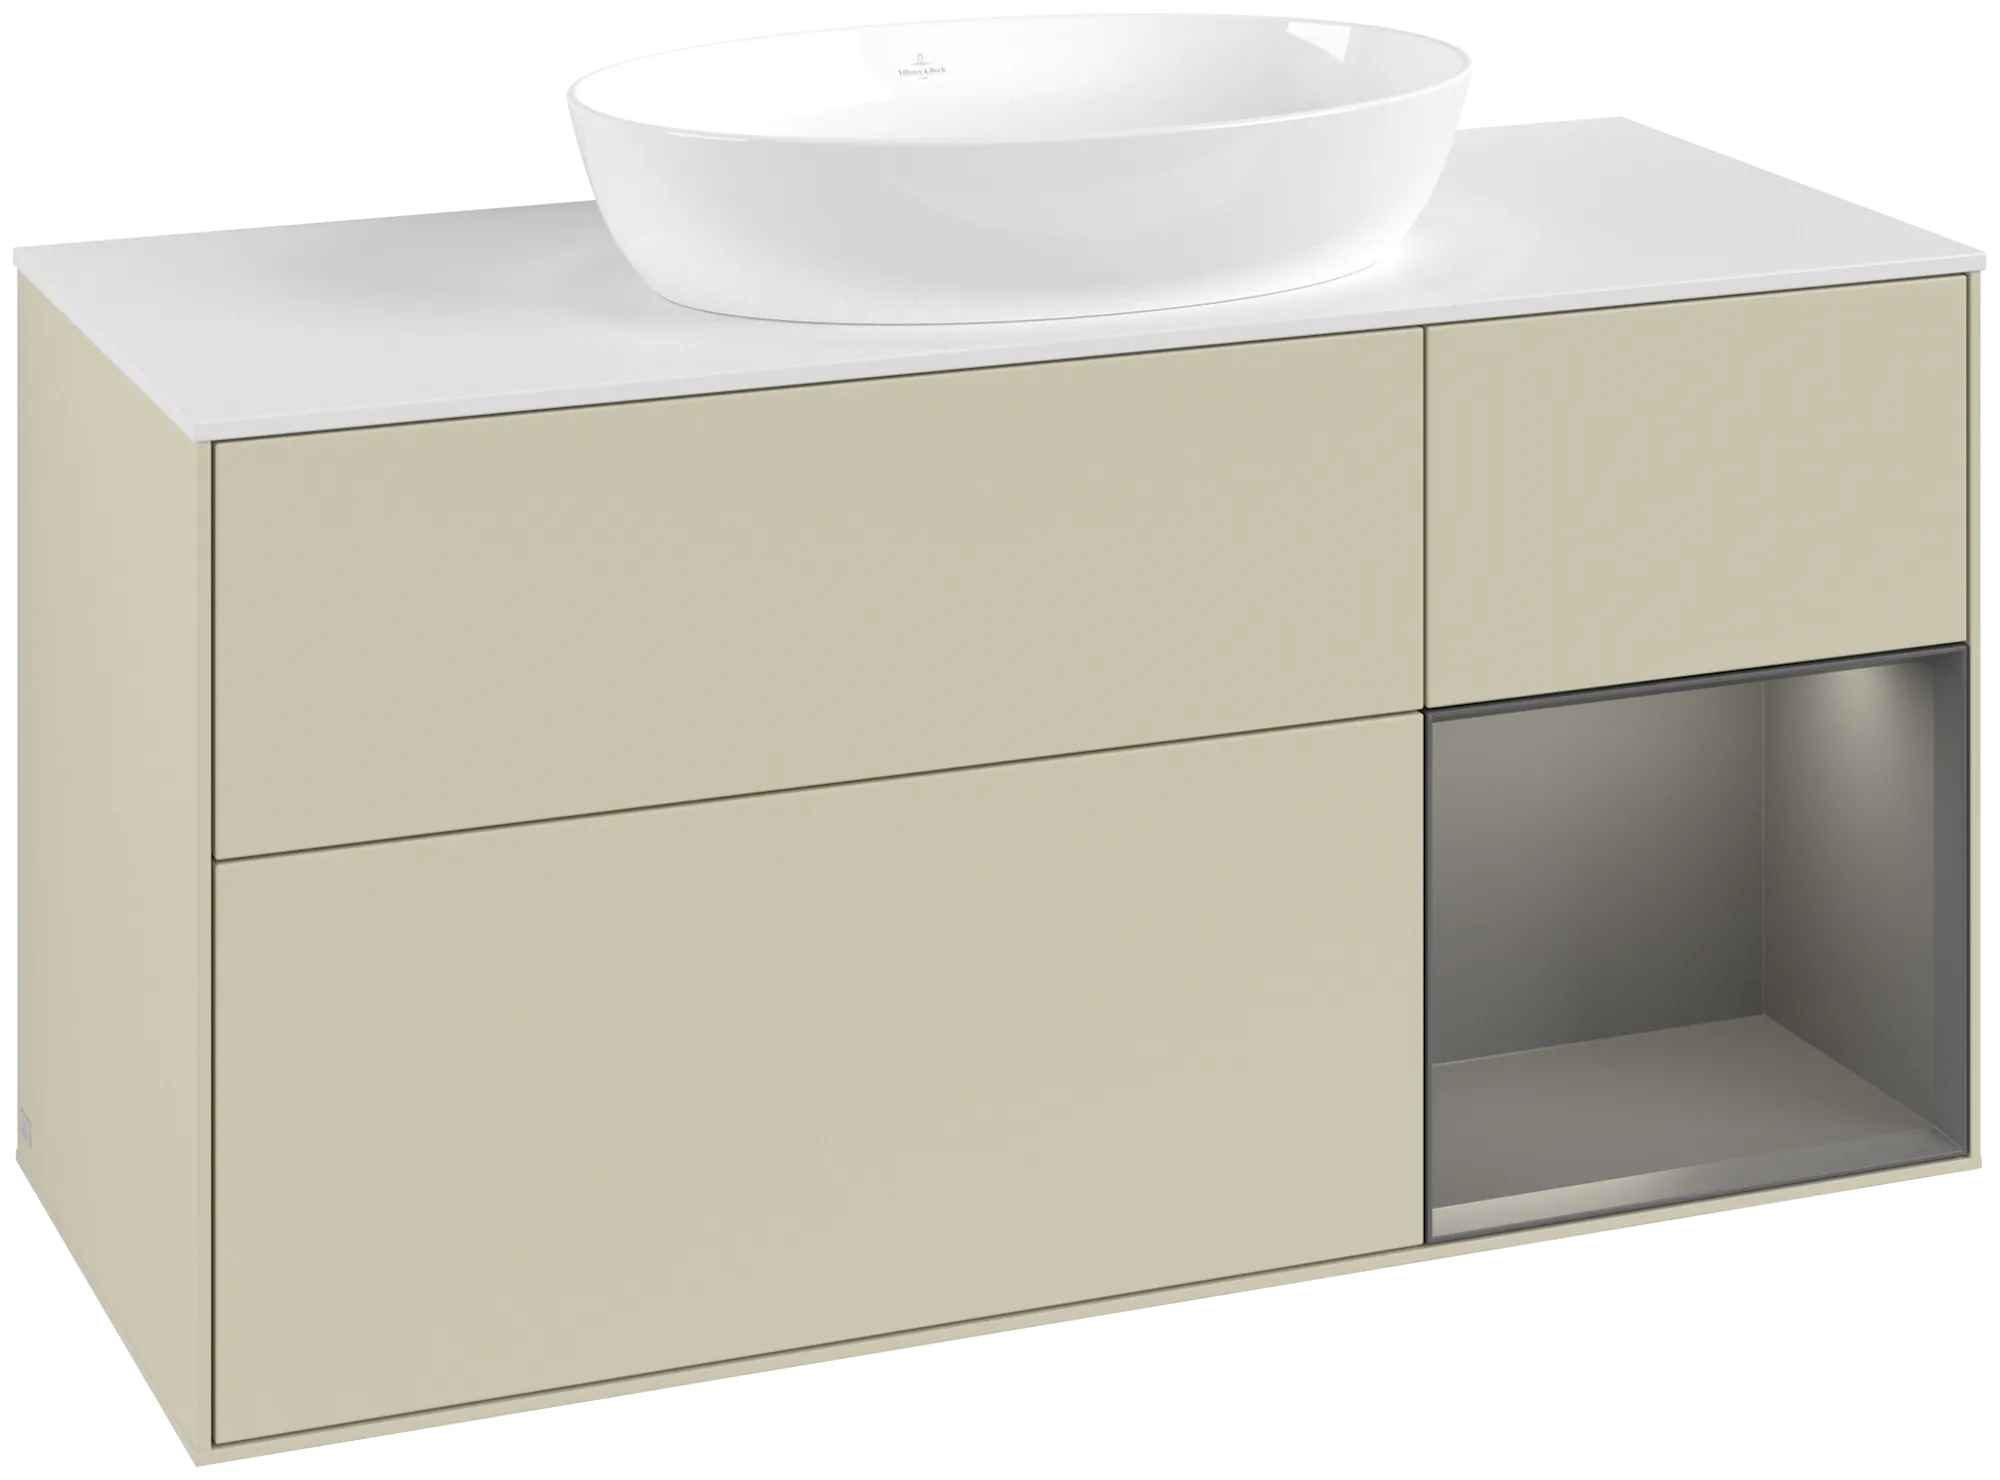 Obrázek VILLEROY BOCH Finion Vanity unit, with lighting, 3 pull-out compartments, 1200 x 603 x 501 mm, Silk Grey Matt Lacquer / Anthracite Matt Lacquer / Glass White Matt #FA71GKHJ